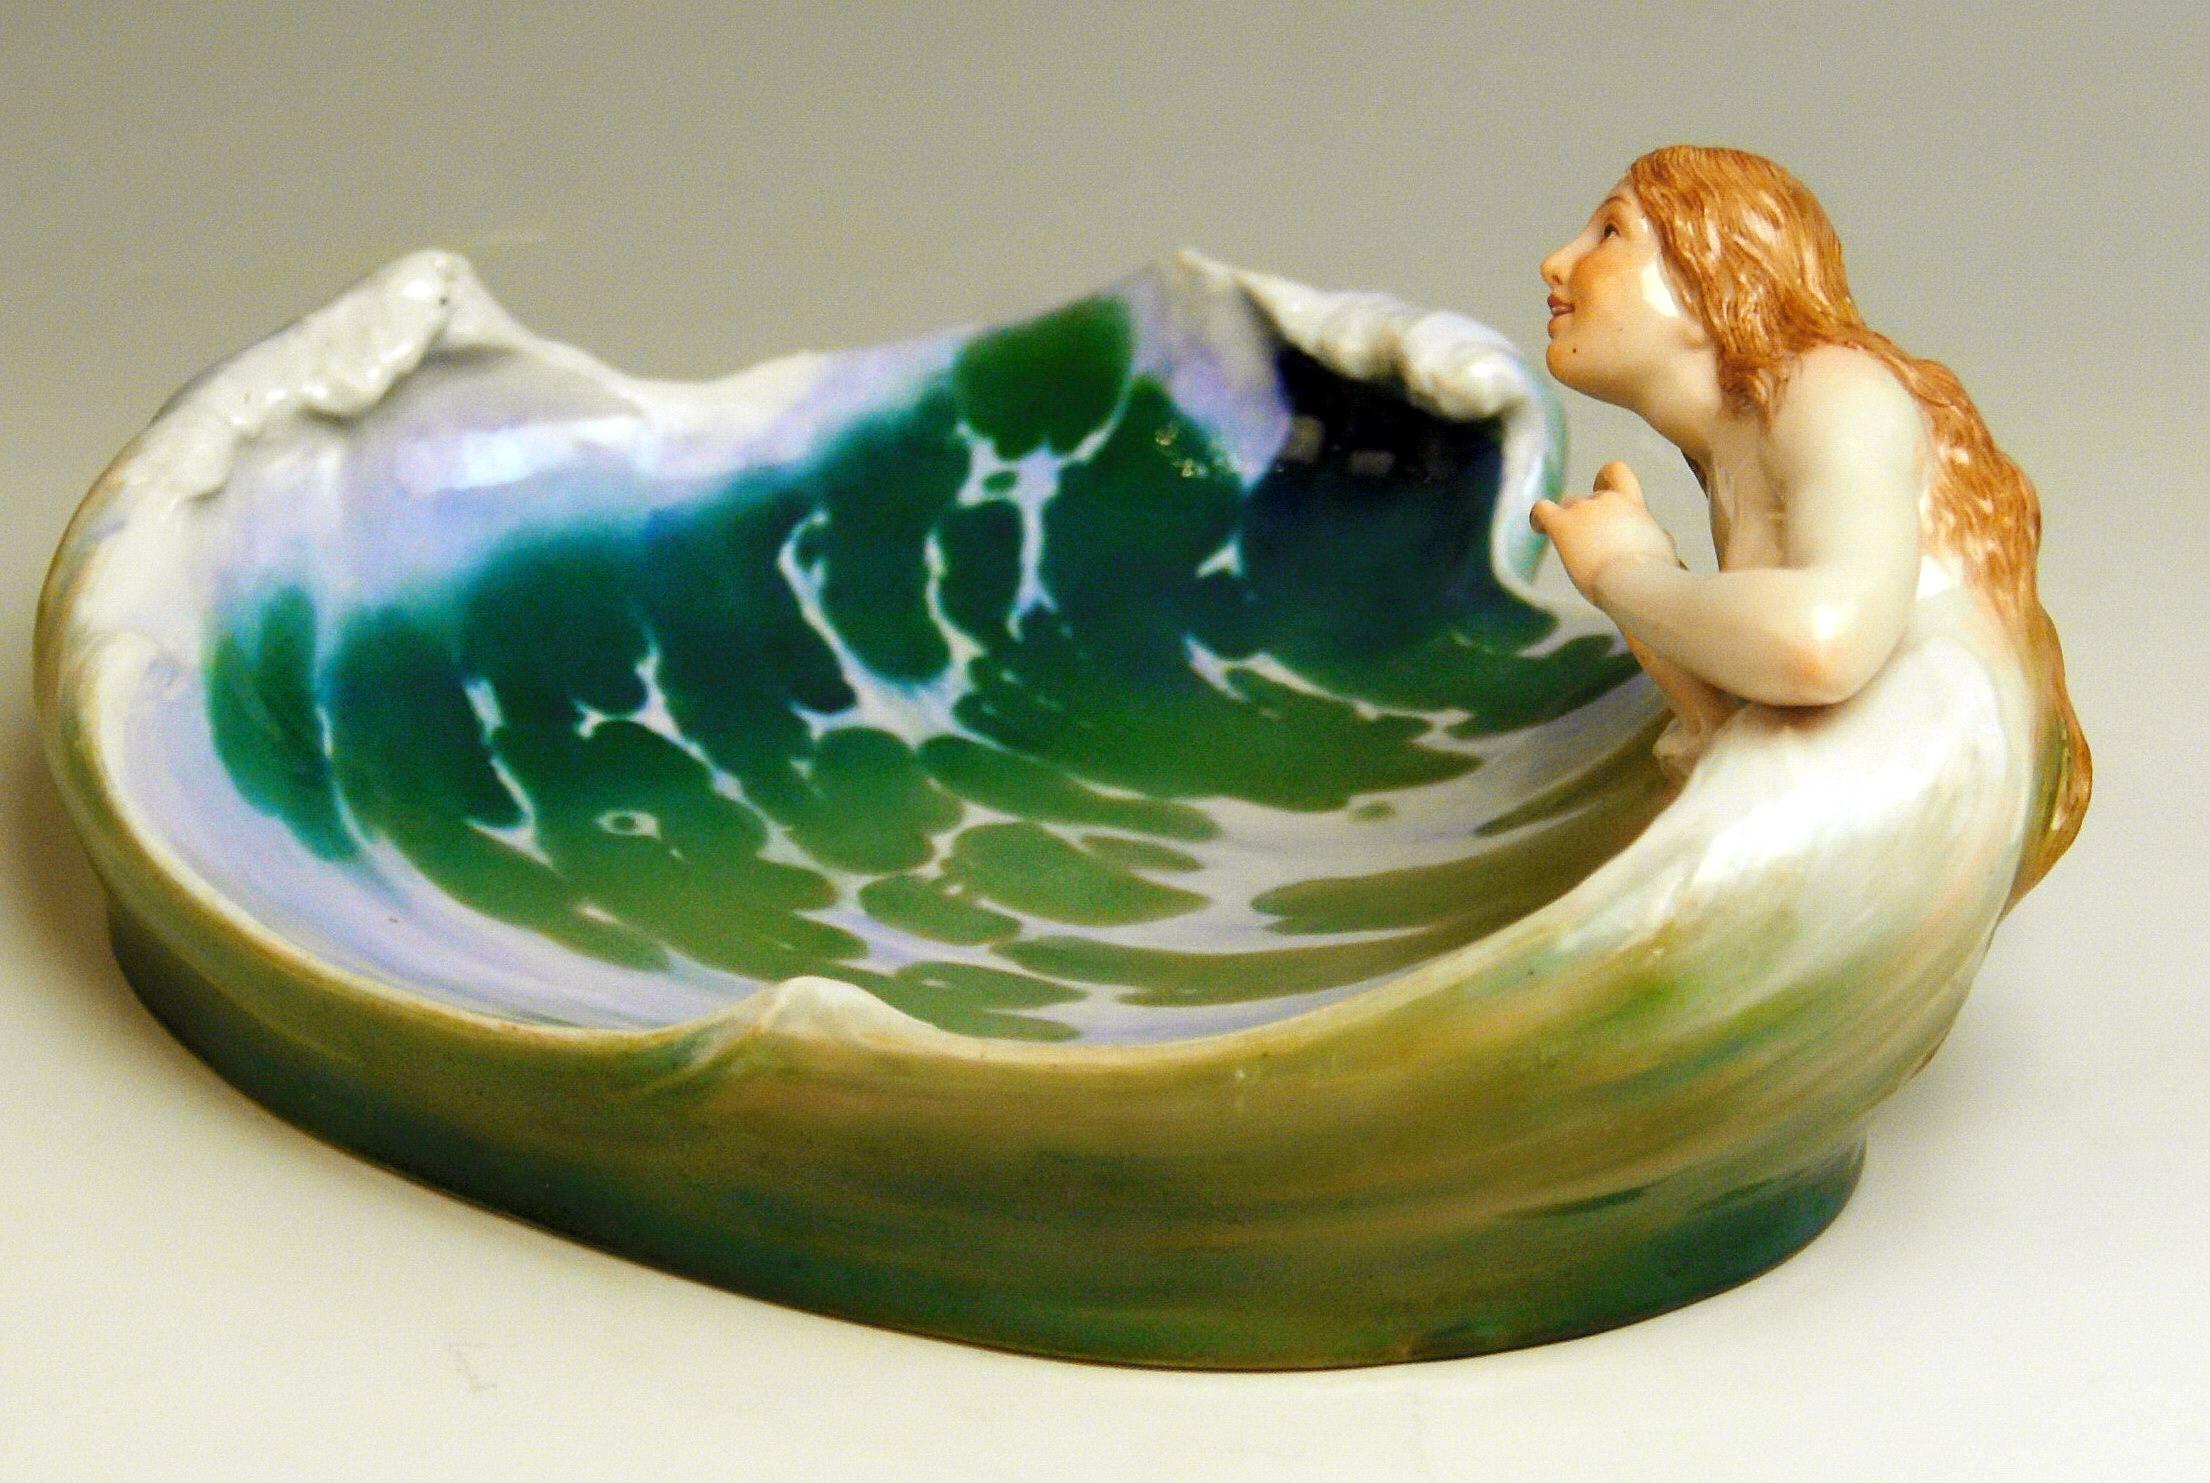 Meissen rarest art nouveau item: the wave

Measures / dimensions:
height 3.34 inches
depth 6.10 inches
width 8.26 inches

Manufactory: Meissen
hallmarked: Blue Meissen sword mark (glazed bottom)
model number Q 169 / former's number 4
first